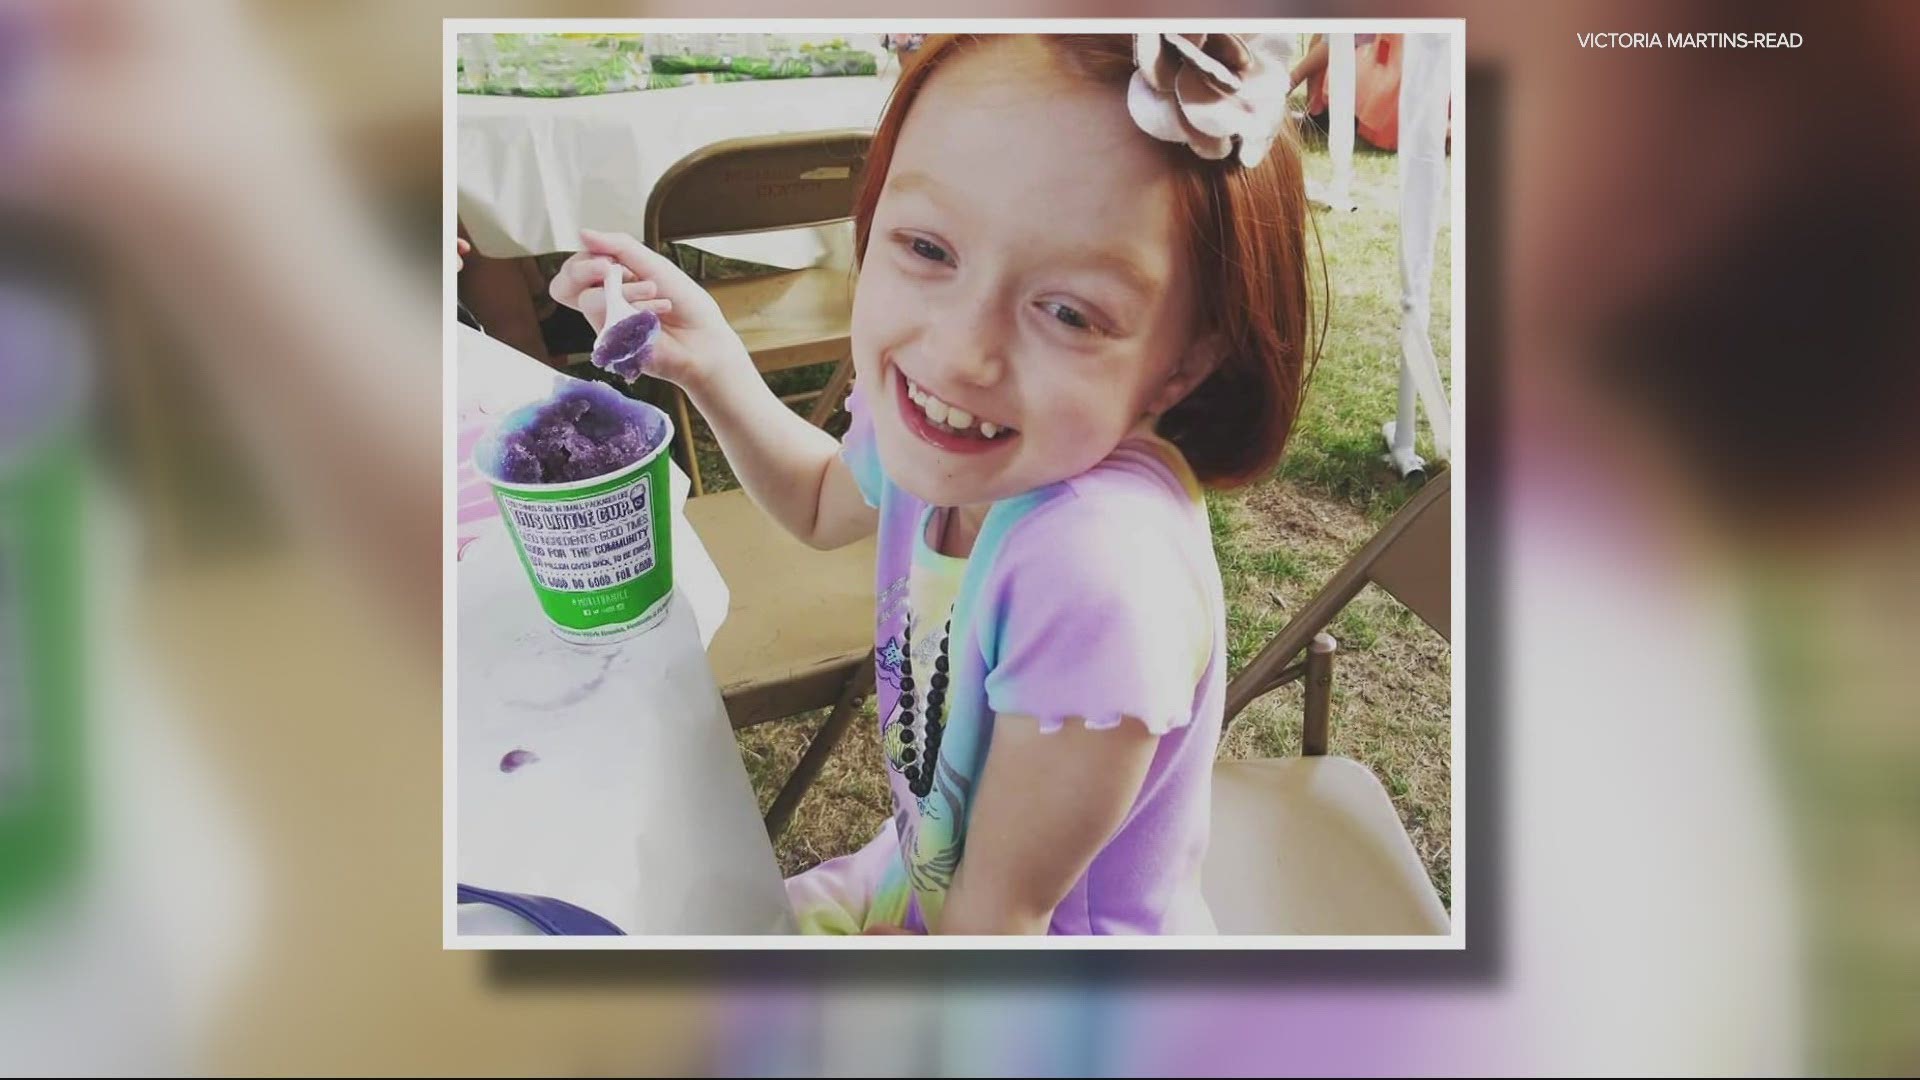 The mother of a 9-year-old hit and killed by a car says her surviving 2-year-old daughter should be home from the hospital soon. Tim Gordon shares her story.